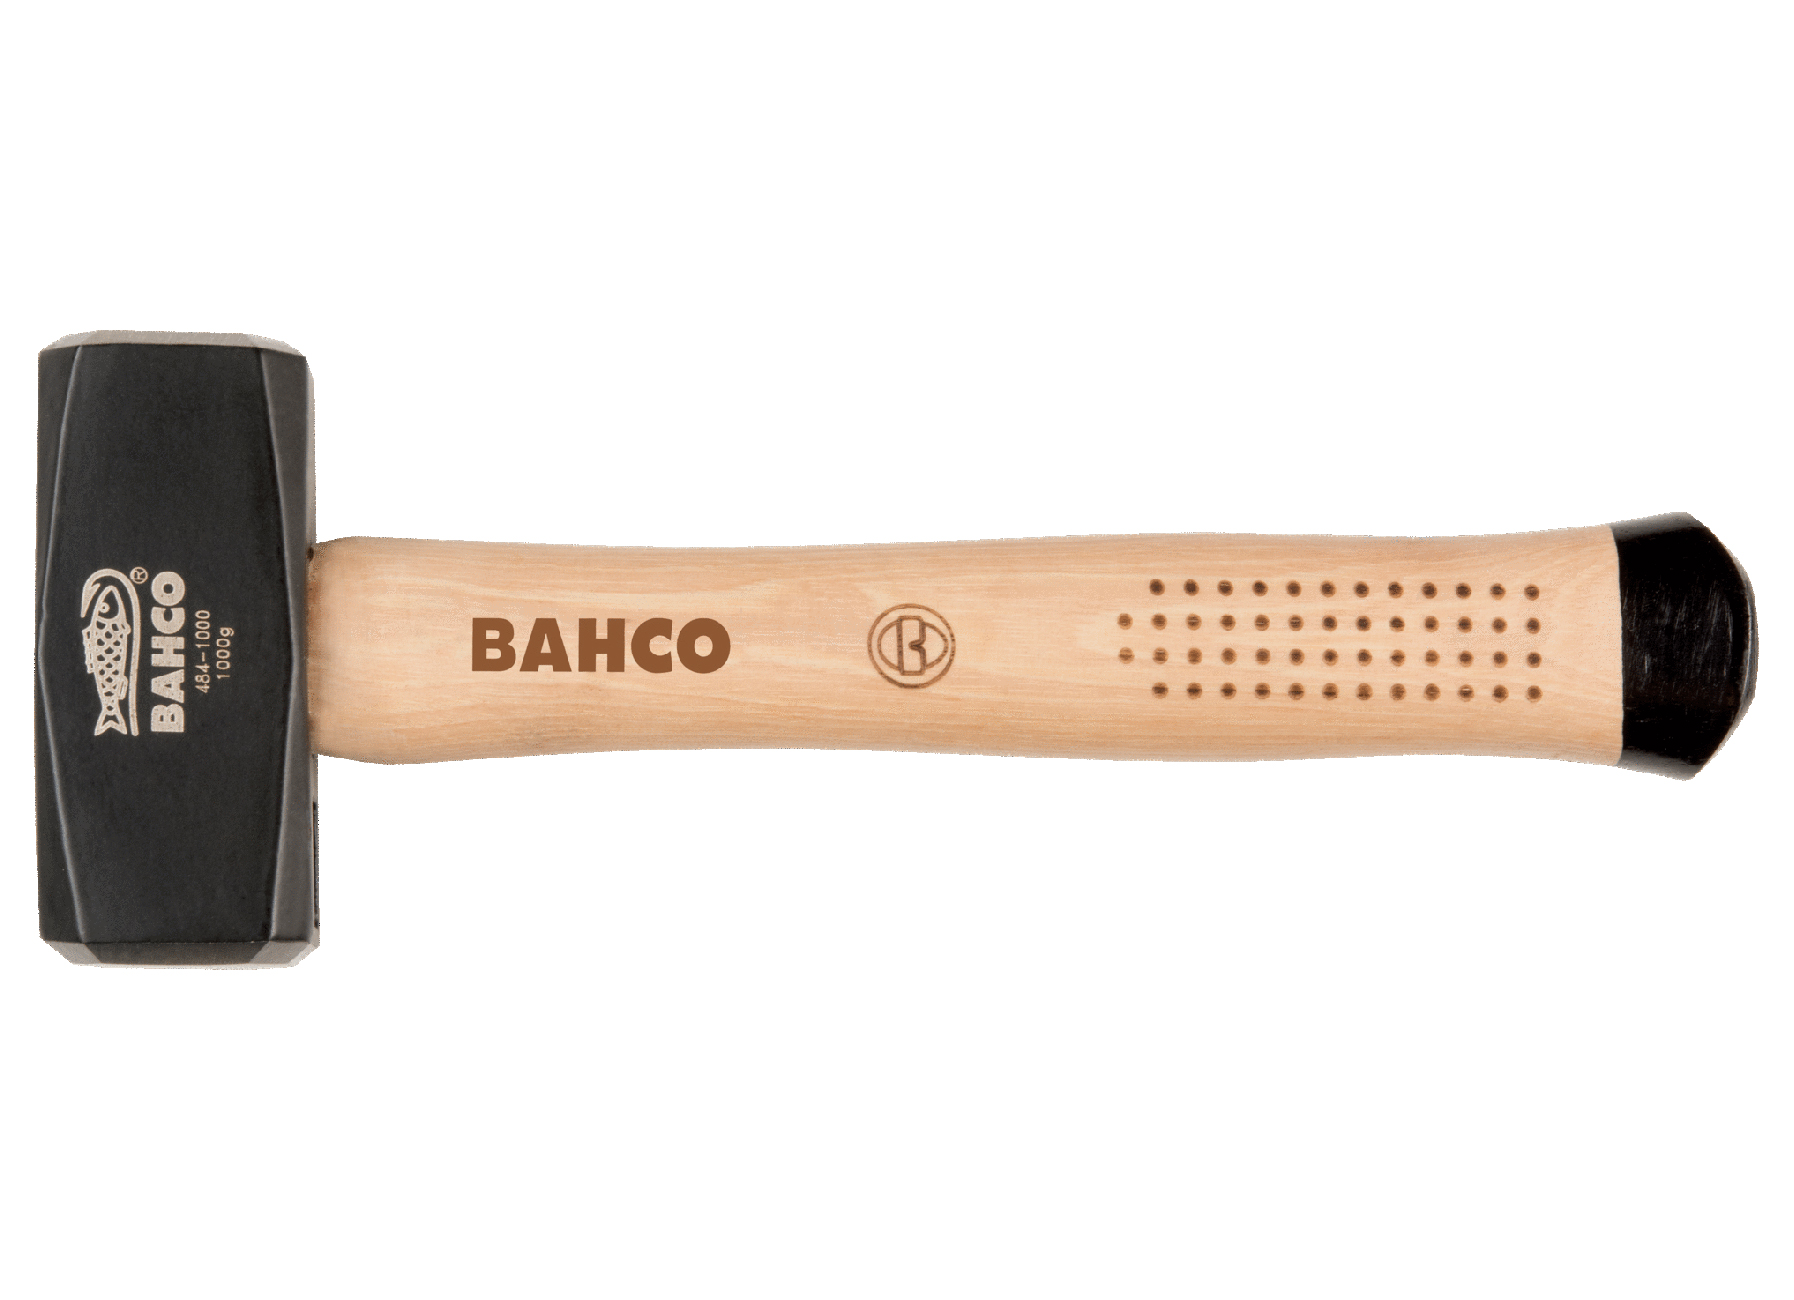 BAHCO 484 MASSETTE MANCHE D''HICKORY 1250G